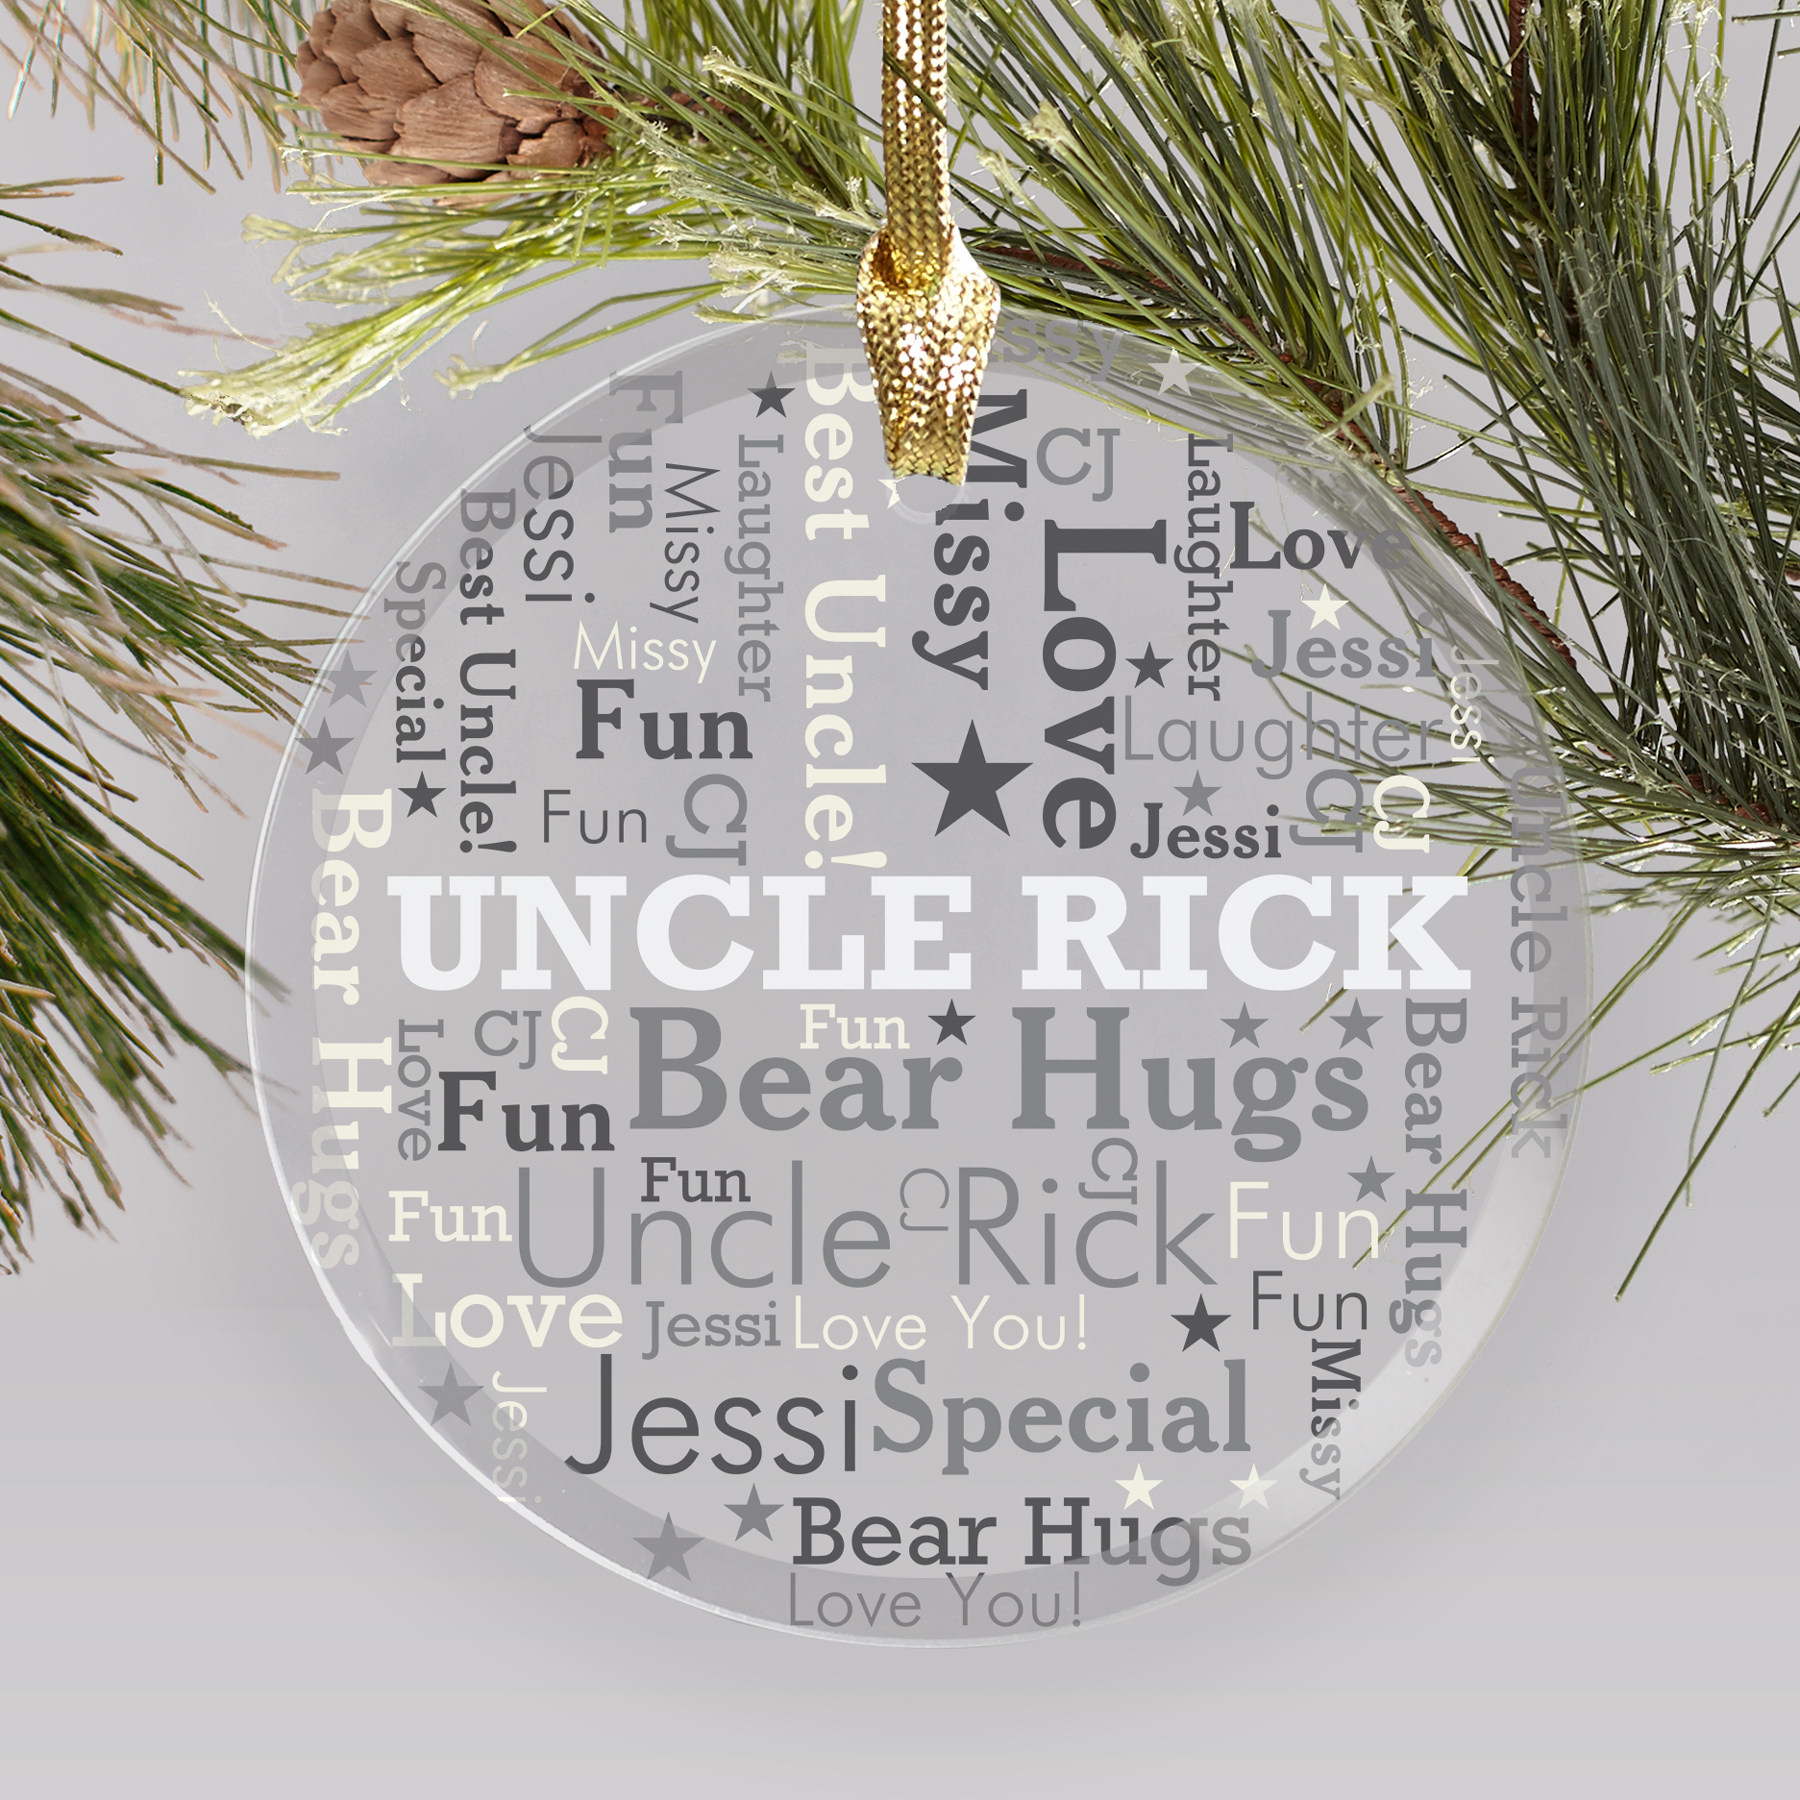 Personalized Any Name Ornaments | Personalized Family Ornaments